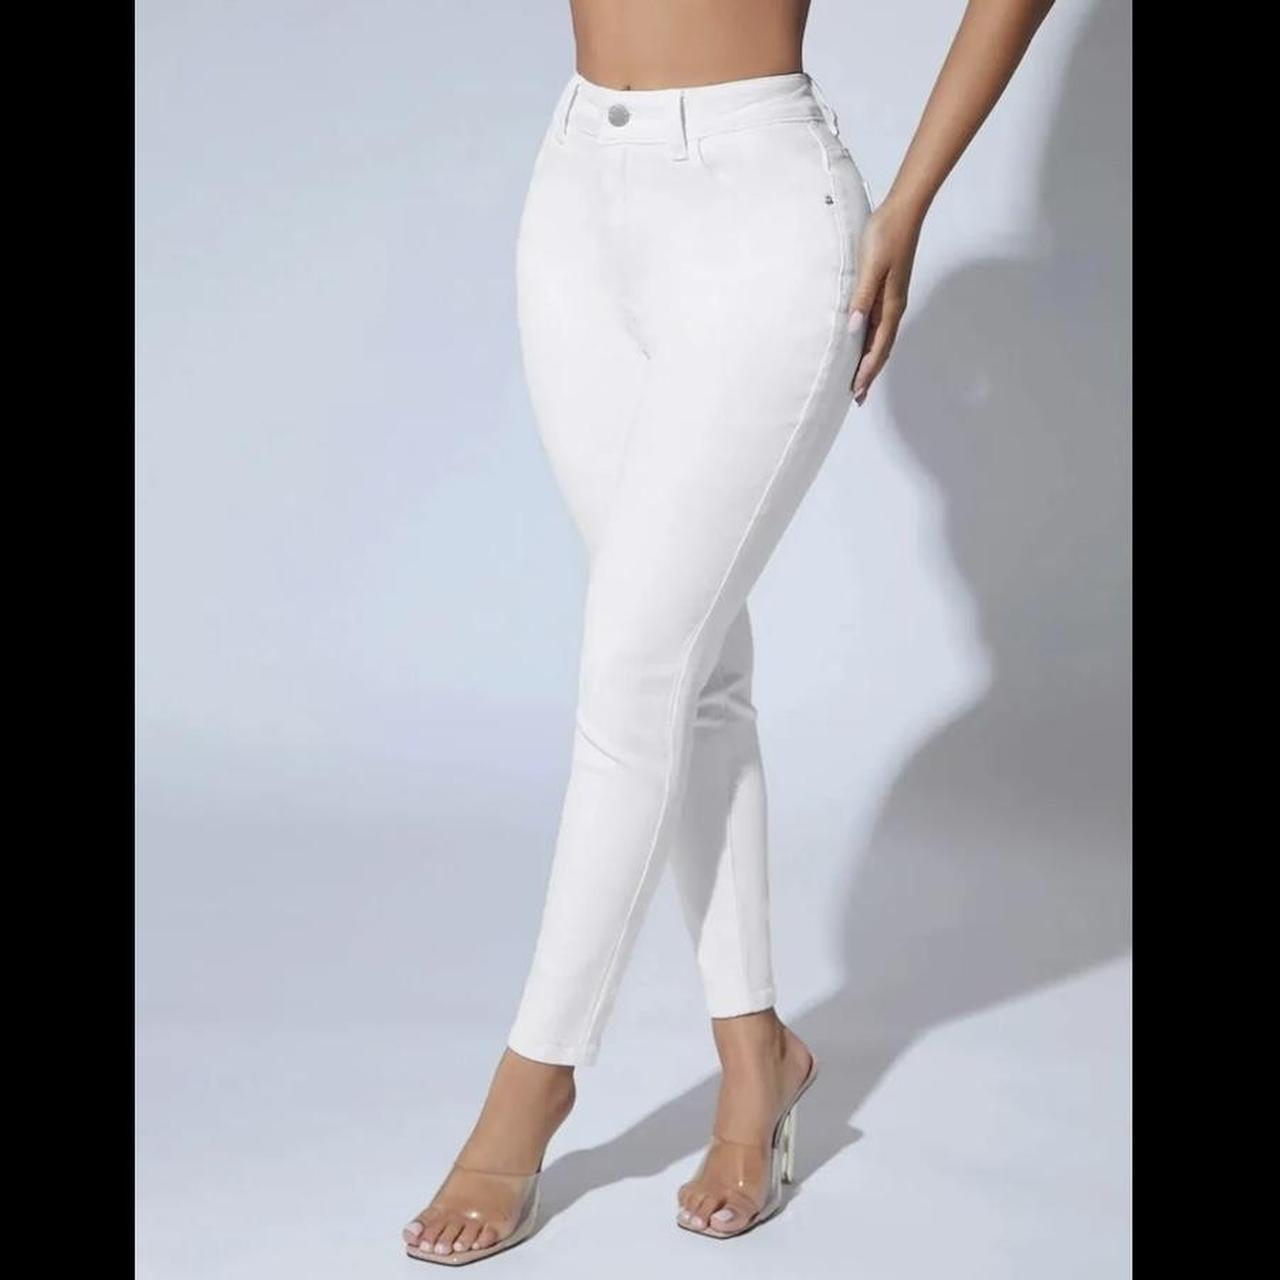 SHEIN PETITE WHITE Solid Skinny Slant Pocket Jeans Zip Fly Patched